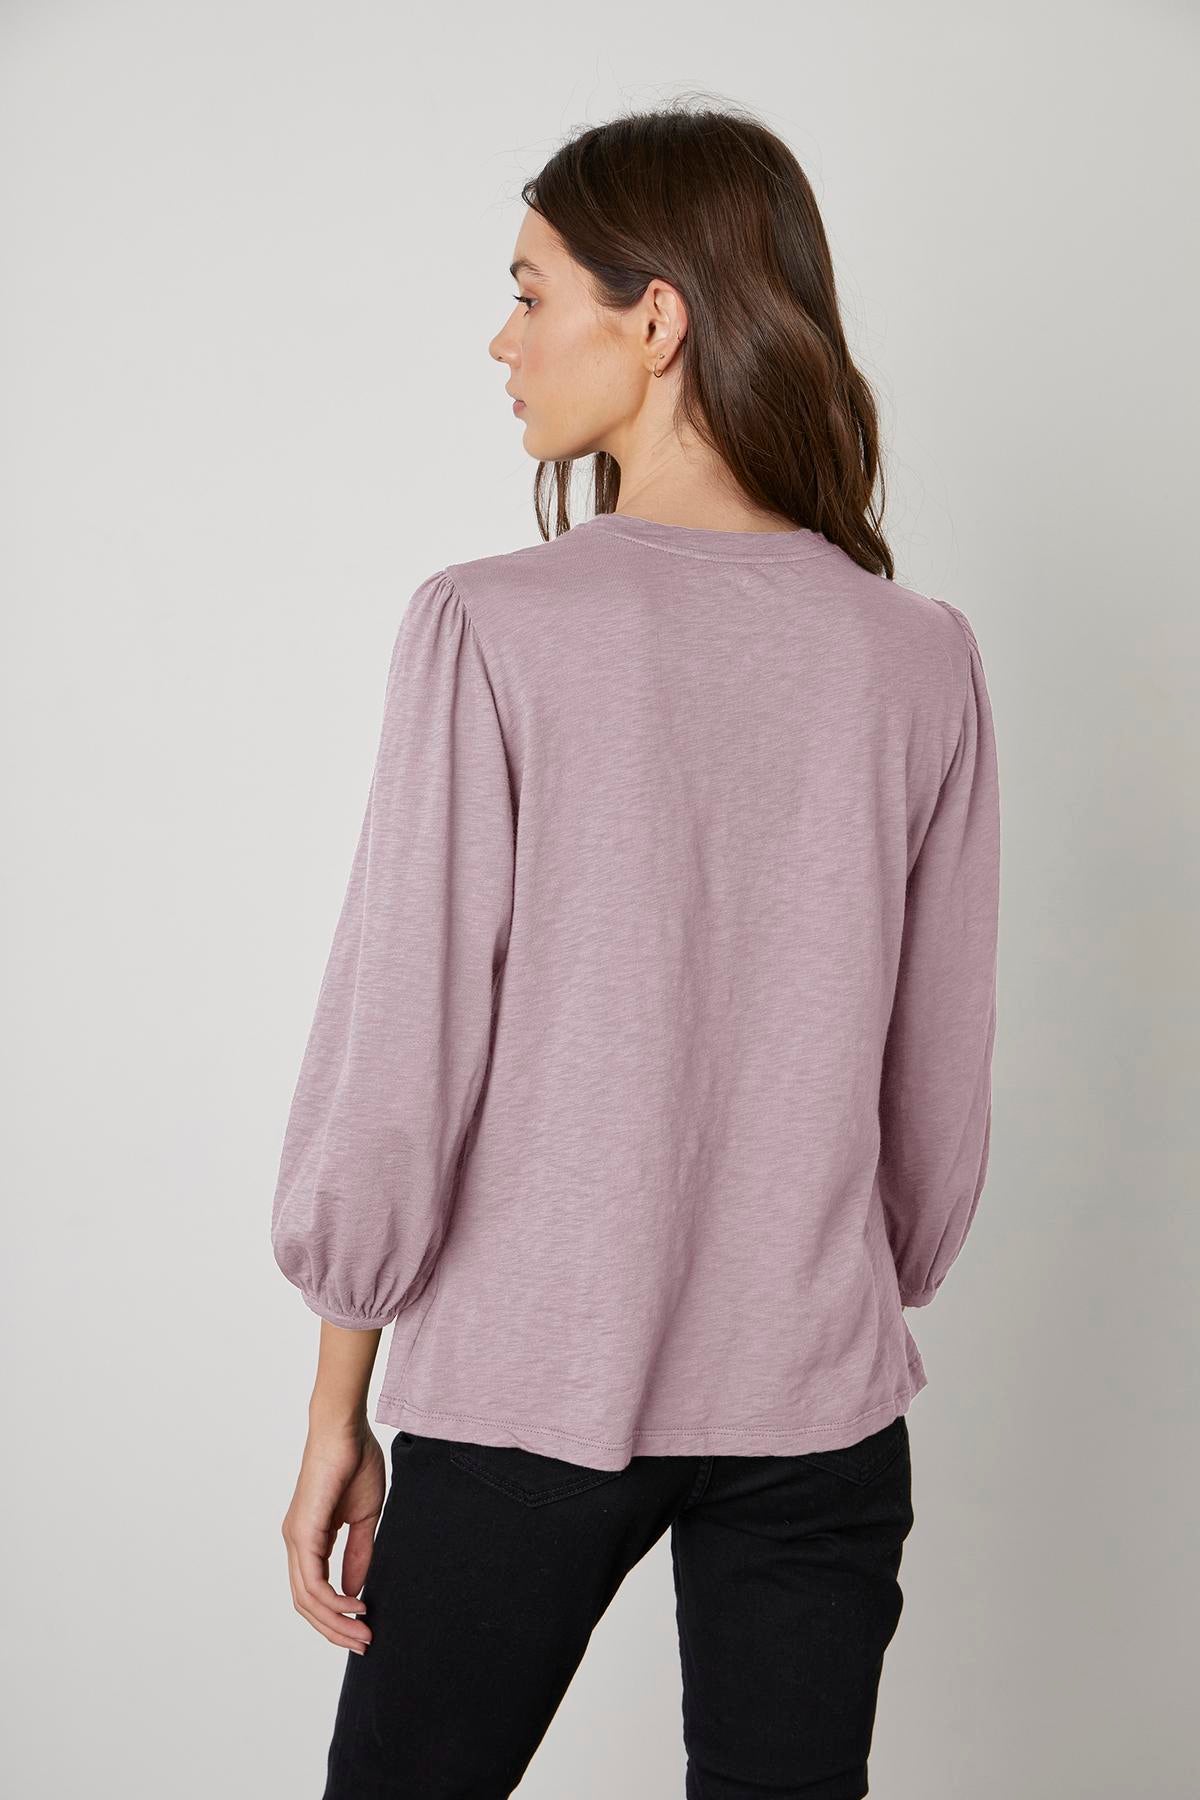 The back view of a woman wearing the Velvet by Graham & Spencer ANETTE PUFF SLEEVE TEE.-35416302616769